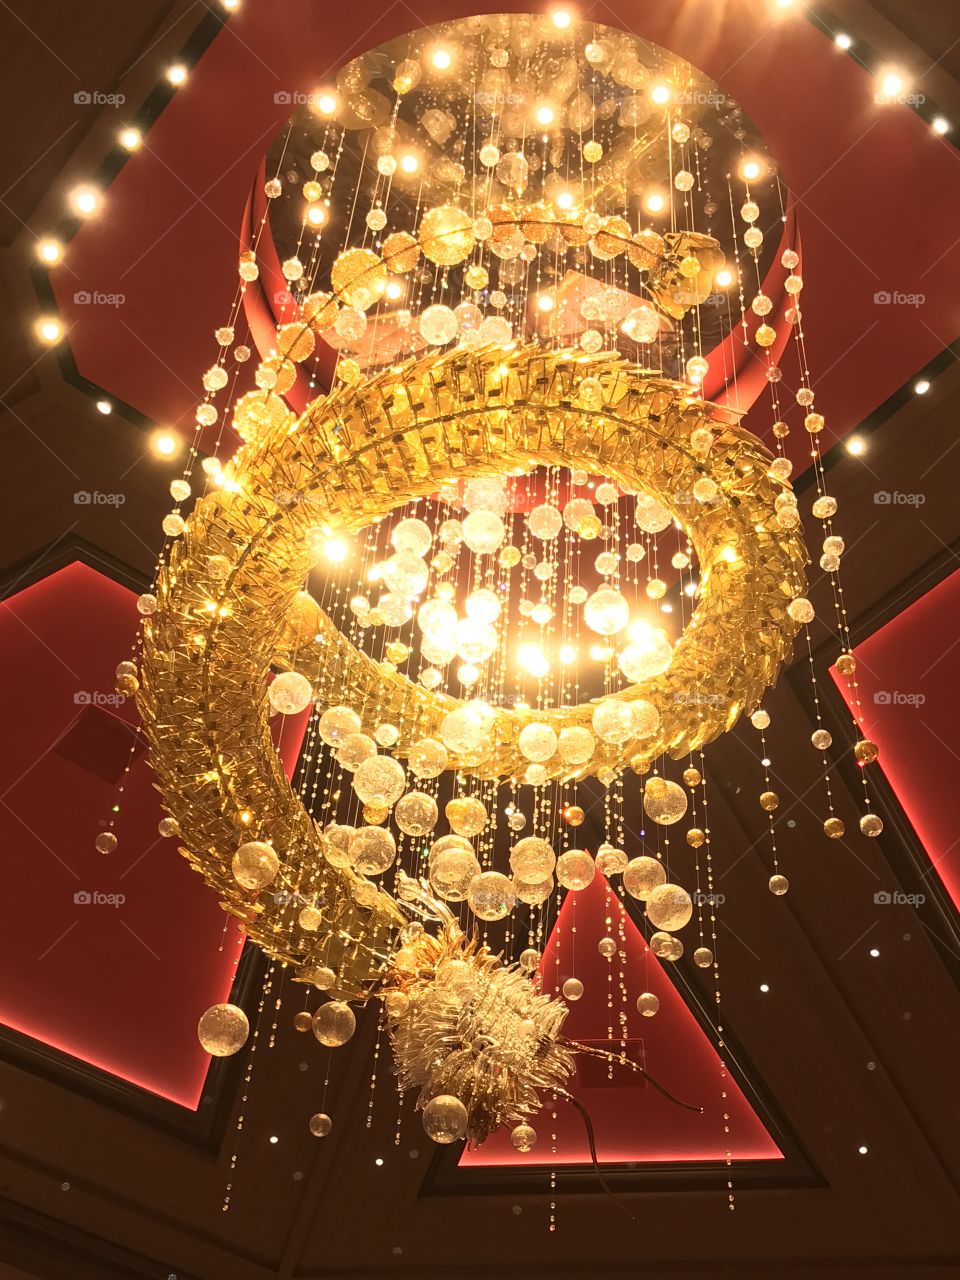 Red dragon chandelier gold and sparkly